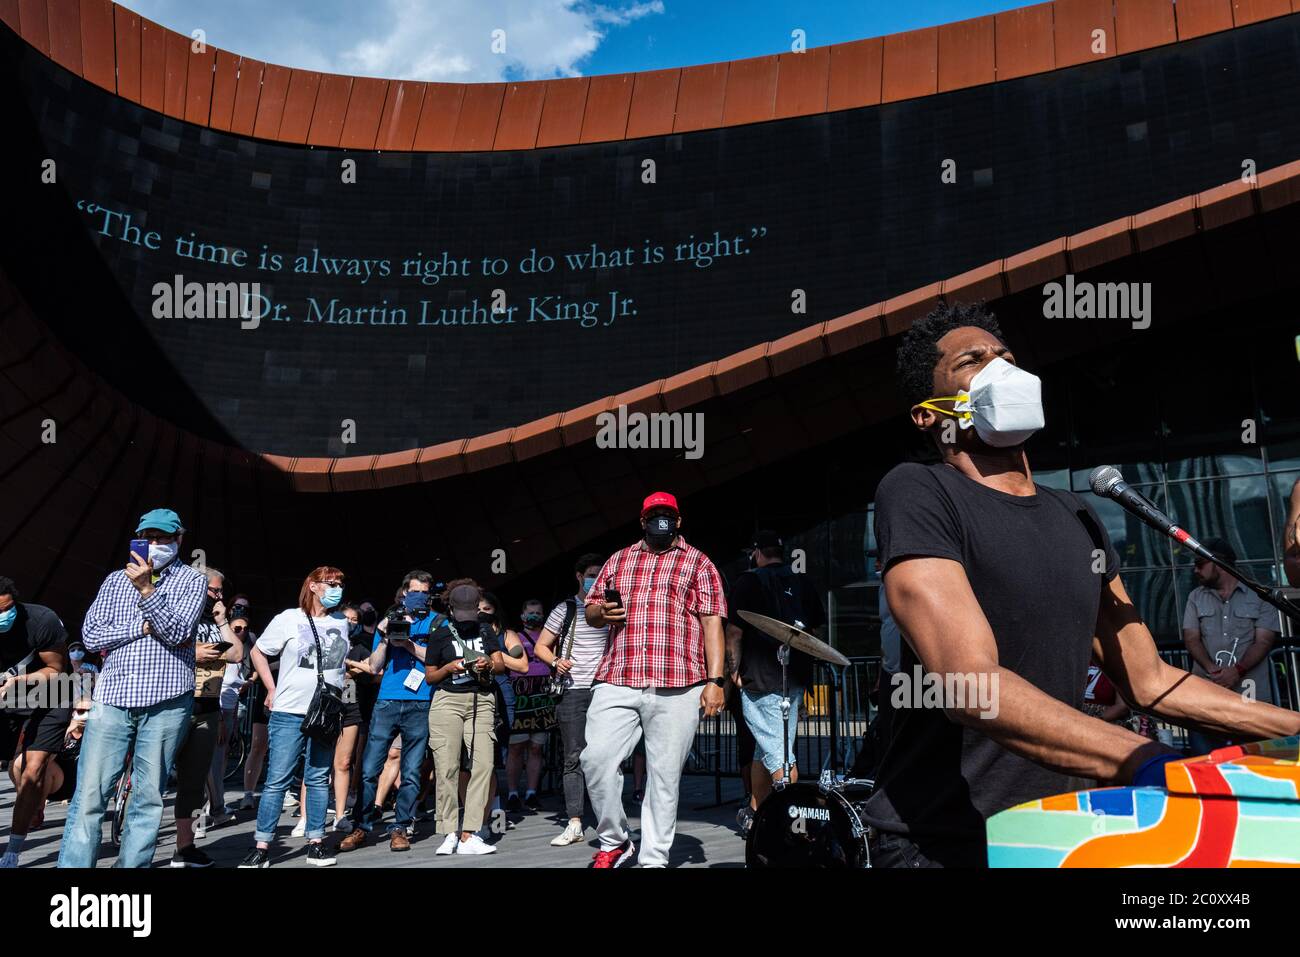 Brooklyn, United States Of America . 12th June, 2020. Entering the third week of protests after the death of George Floyd, Jon Batiste and his band 'Stay Human' play at the Barclays Center calling for racial justice on June 12, 2020, in Brooklyn, New York. (Photo by Gabriele Holtermann/Sipa) Credit: Sipa USA/Alamy Live News Stock Photo